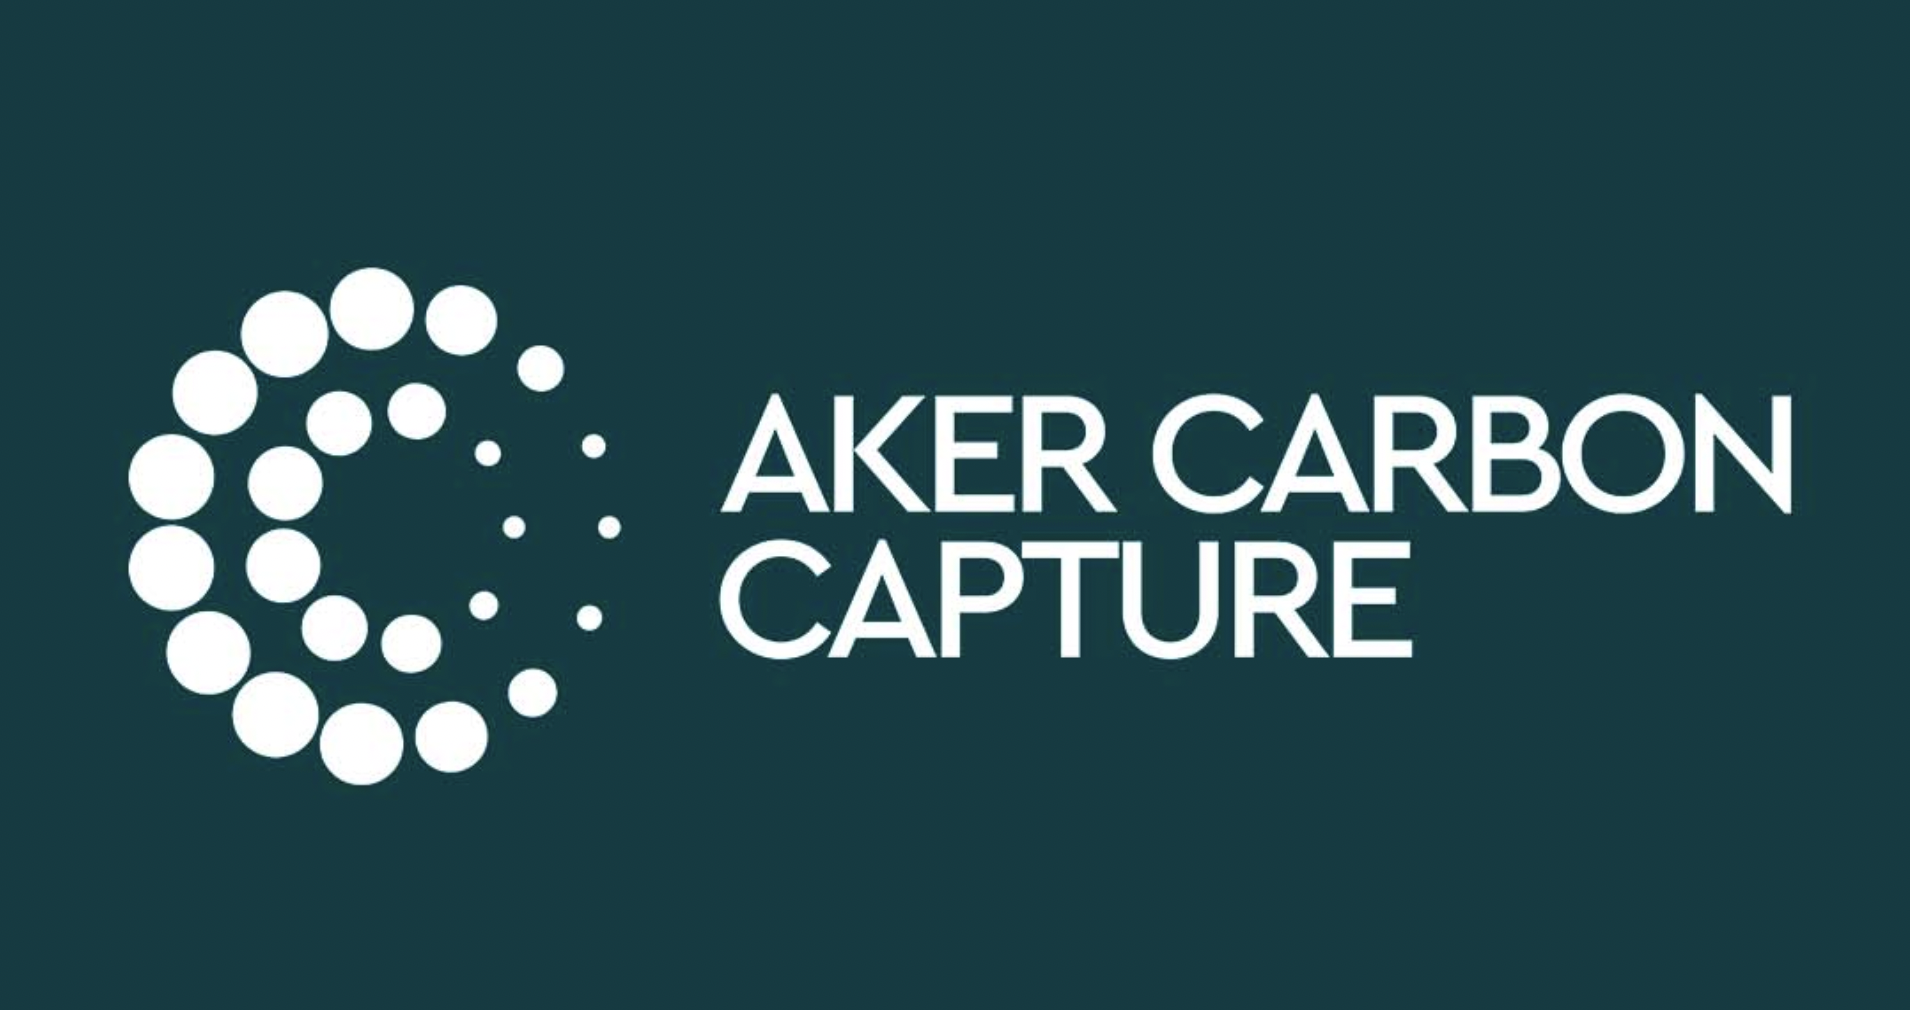 Aker Carbon Capture advances decarbonization with projects in Norway